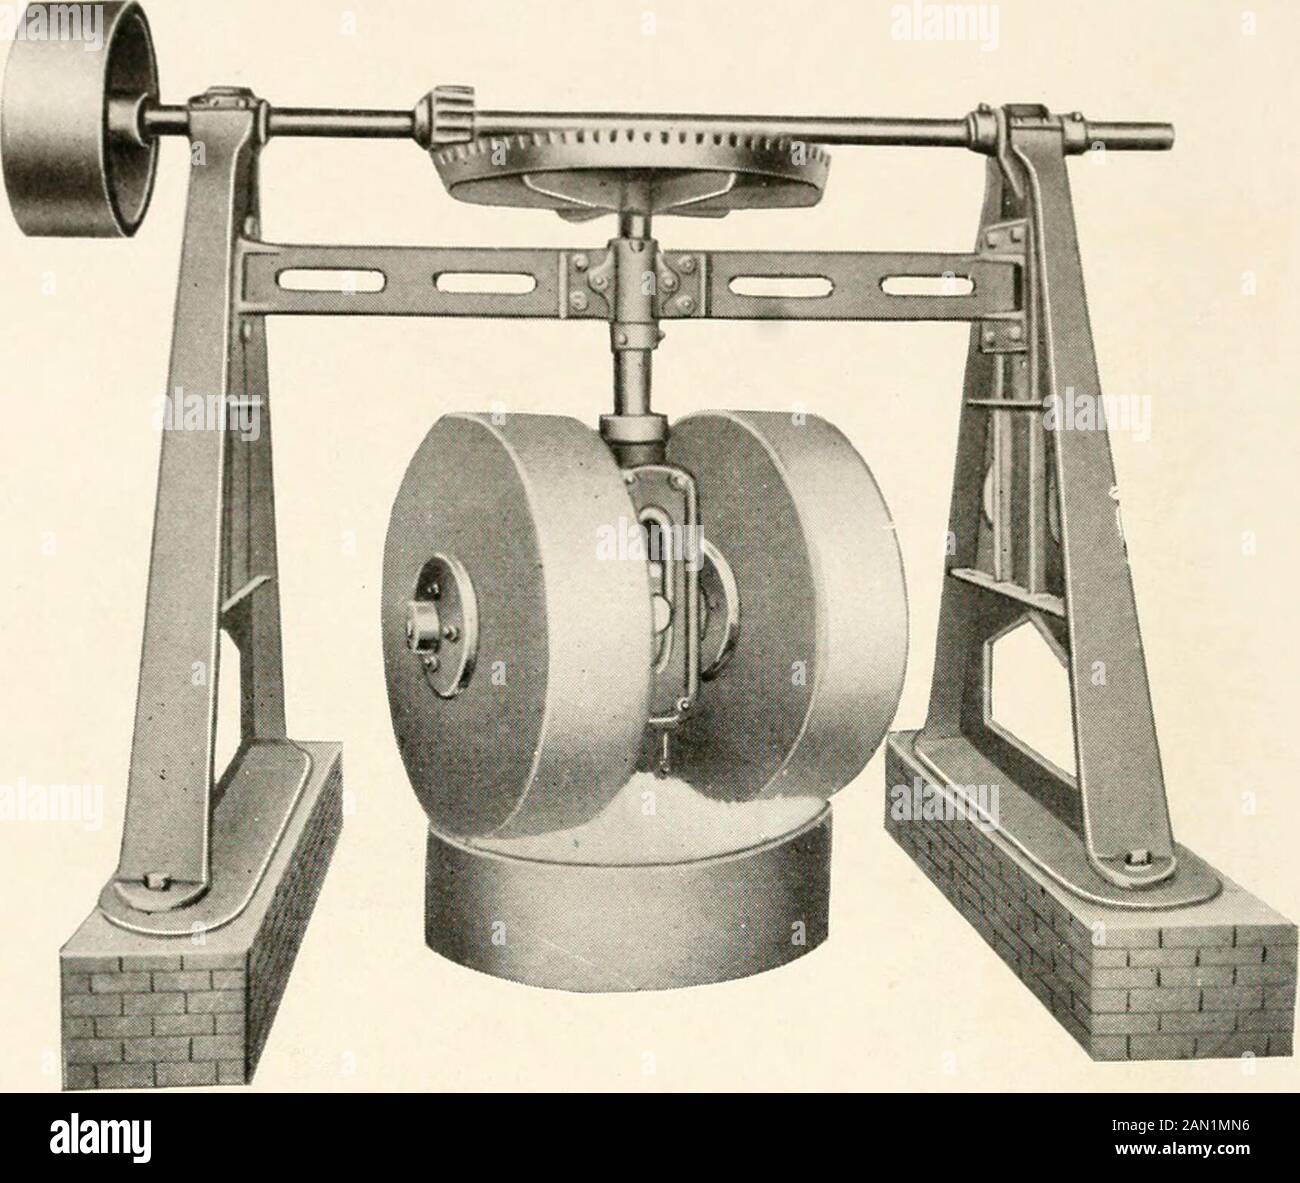 The Strongest Clay Machine EVER! 